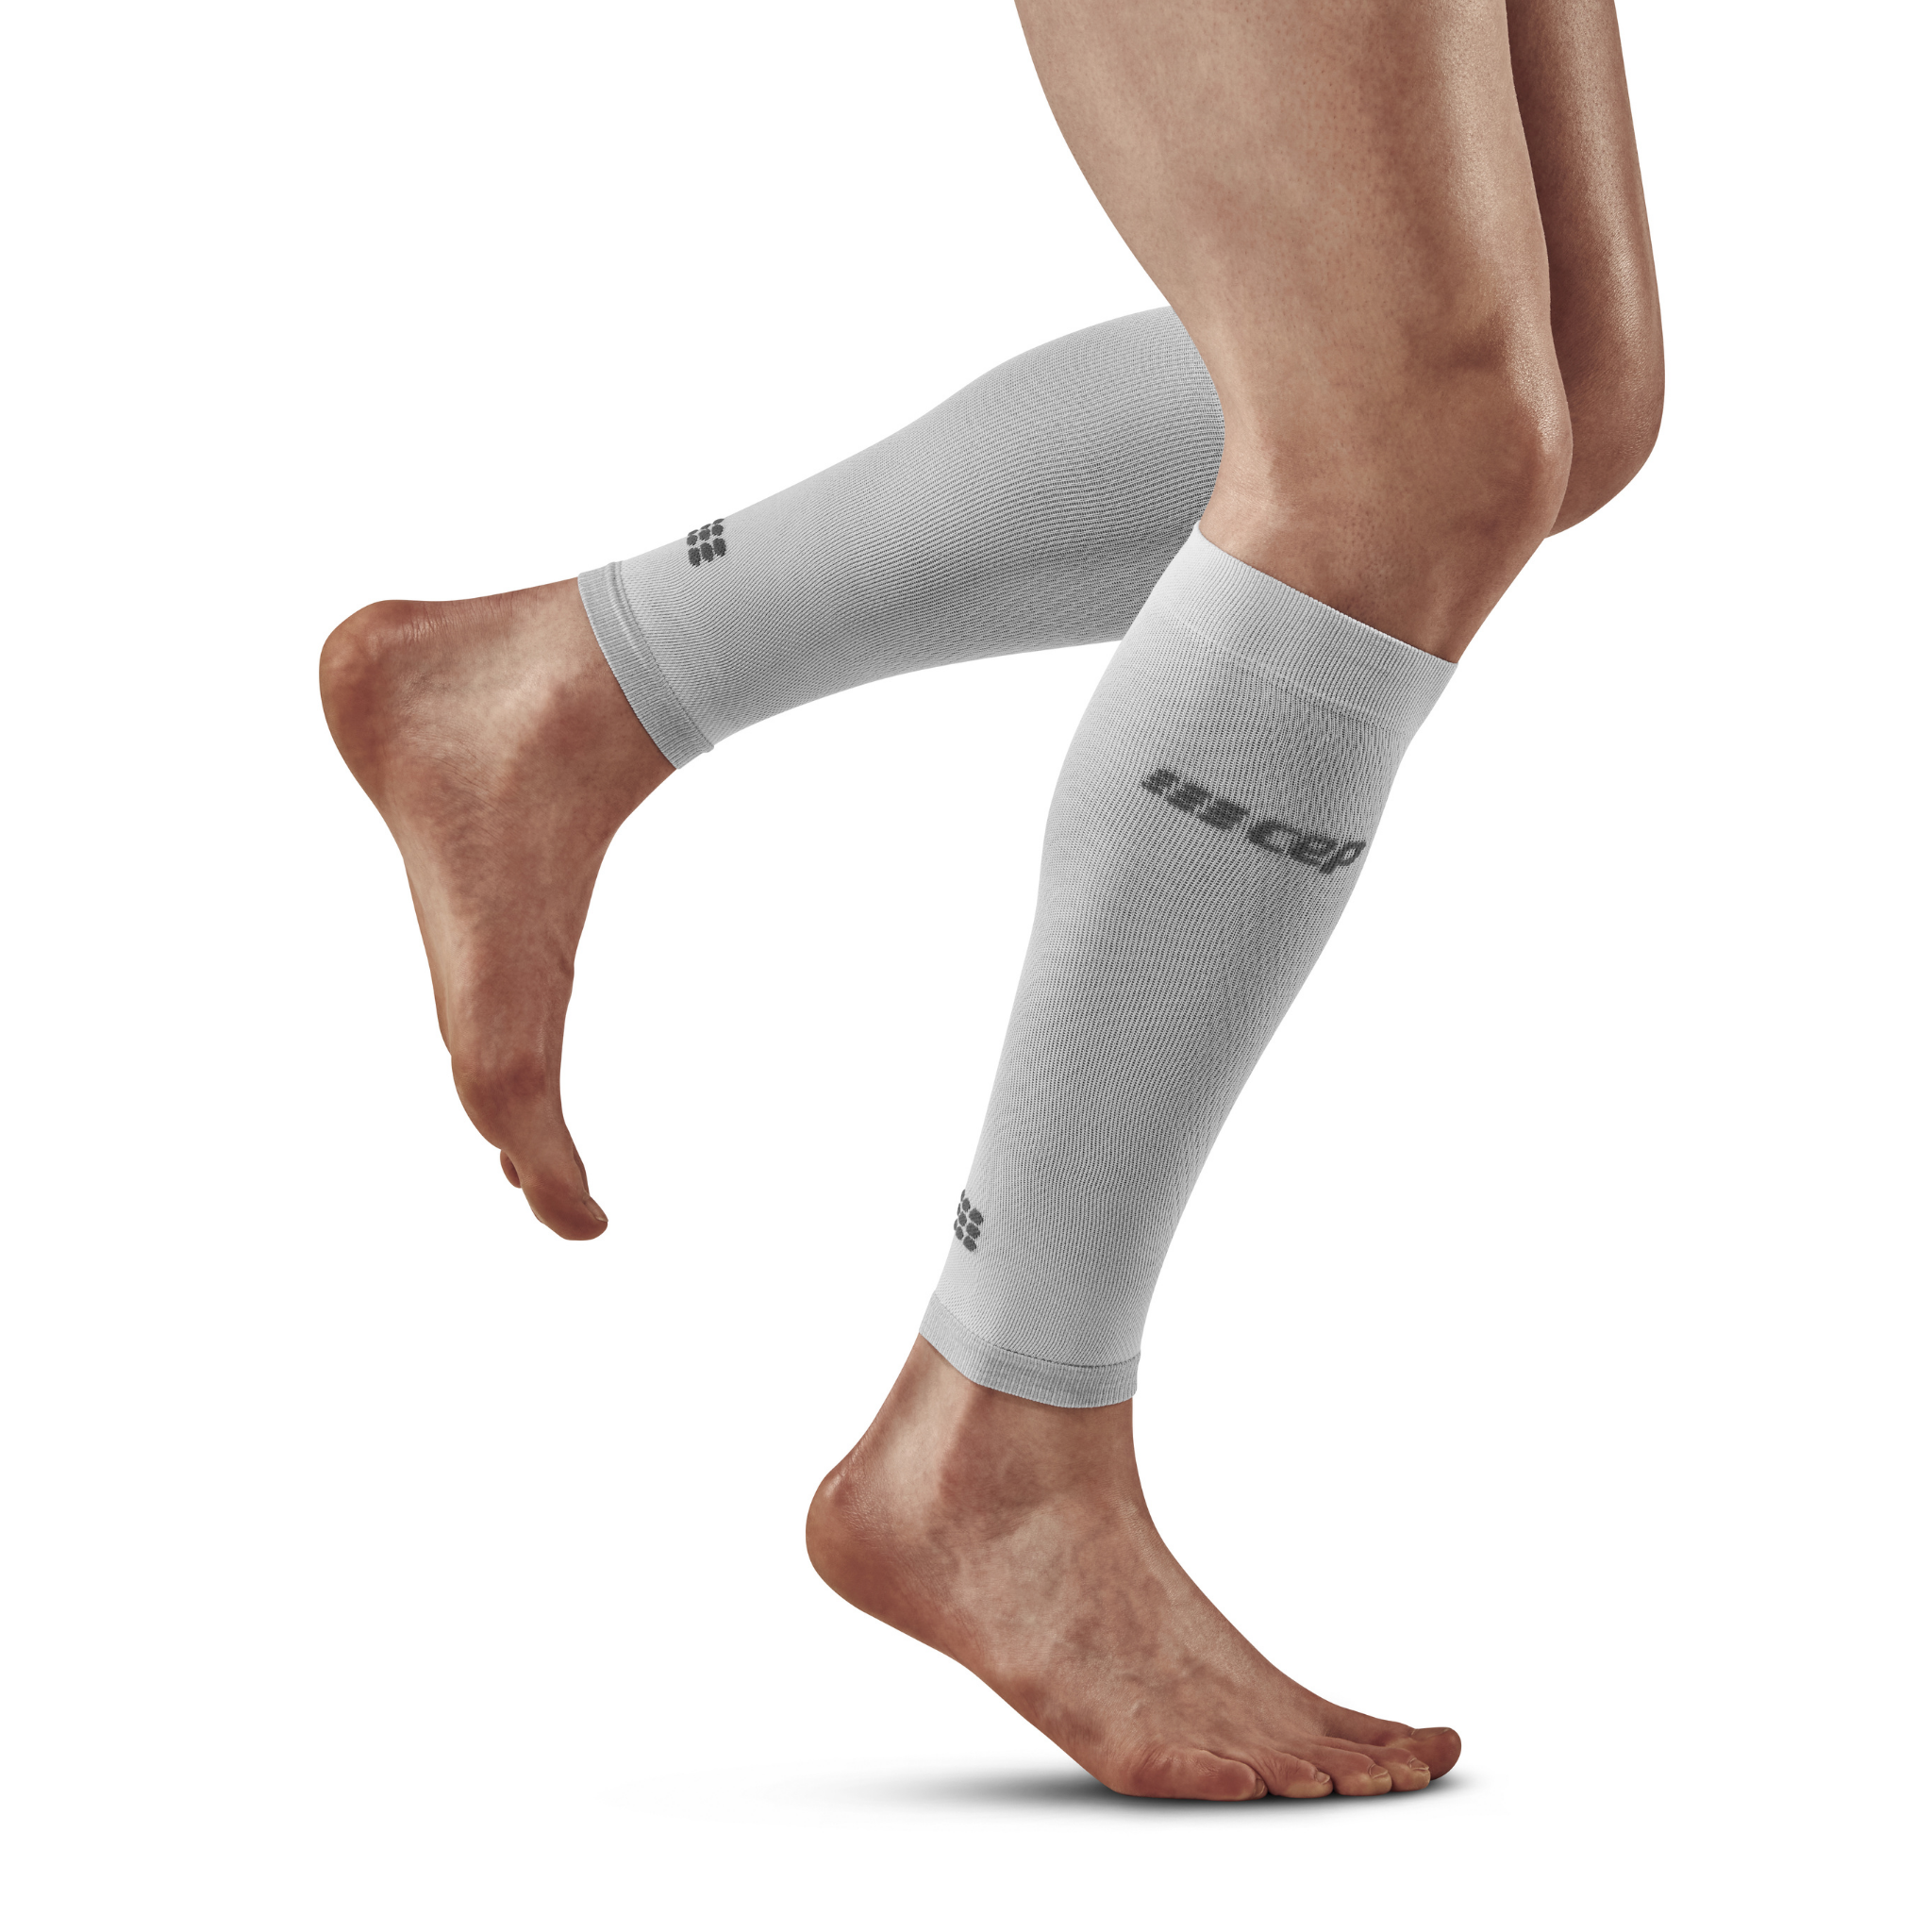 Extra Wide Unisex Compression Calf Sleeve 20-30mmHg for Edema - White,  4X-Large 